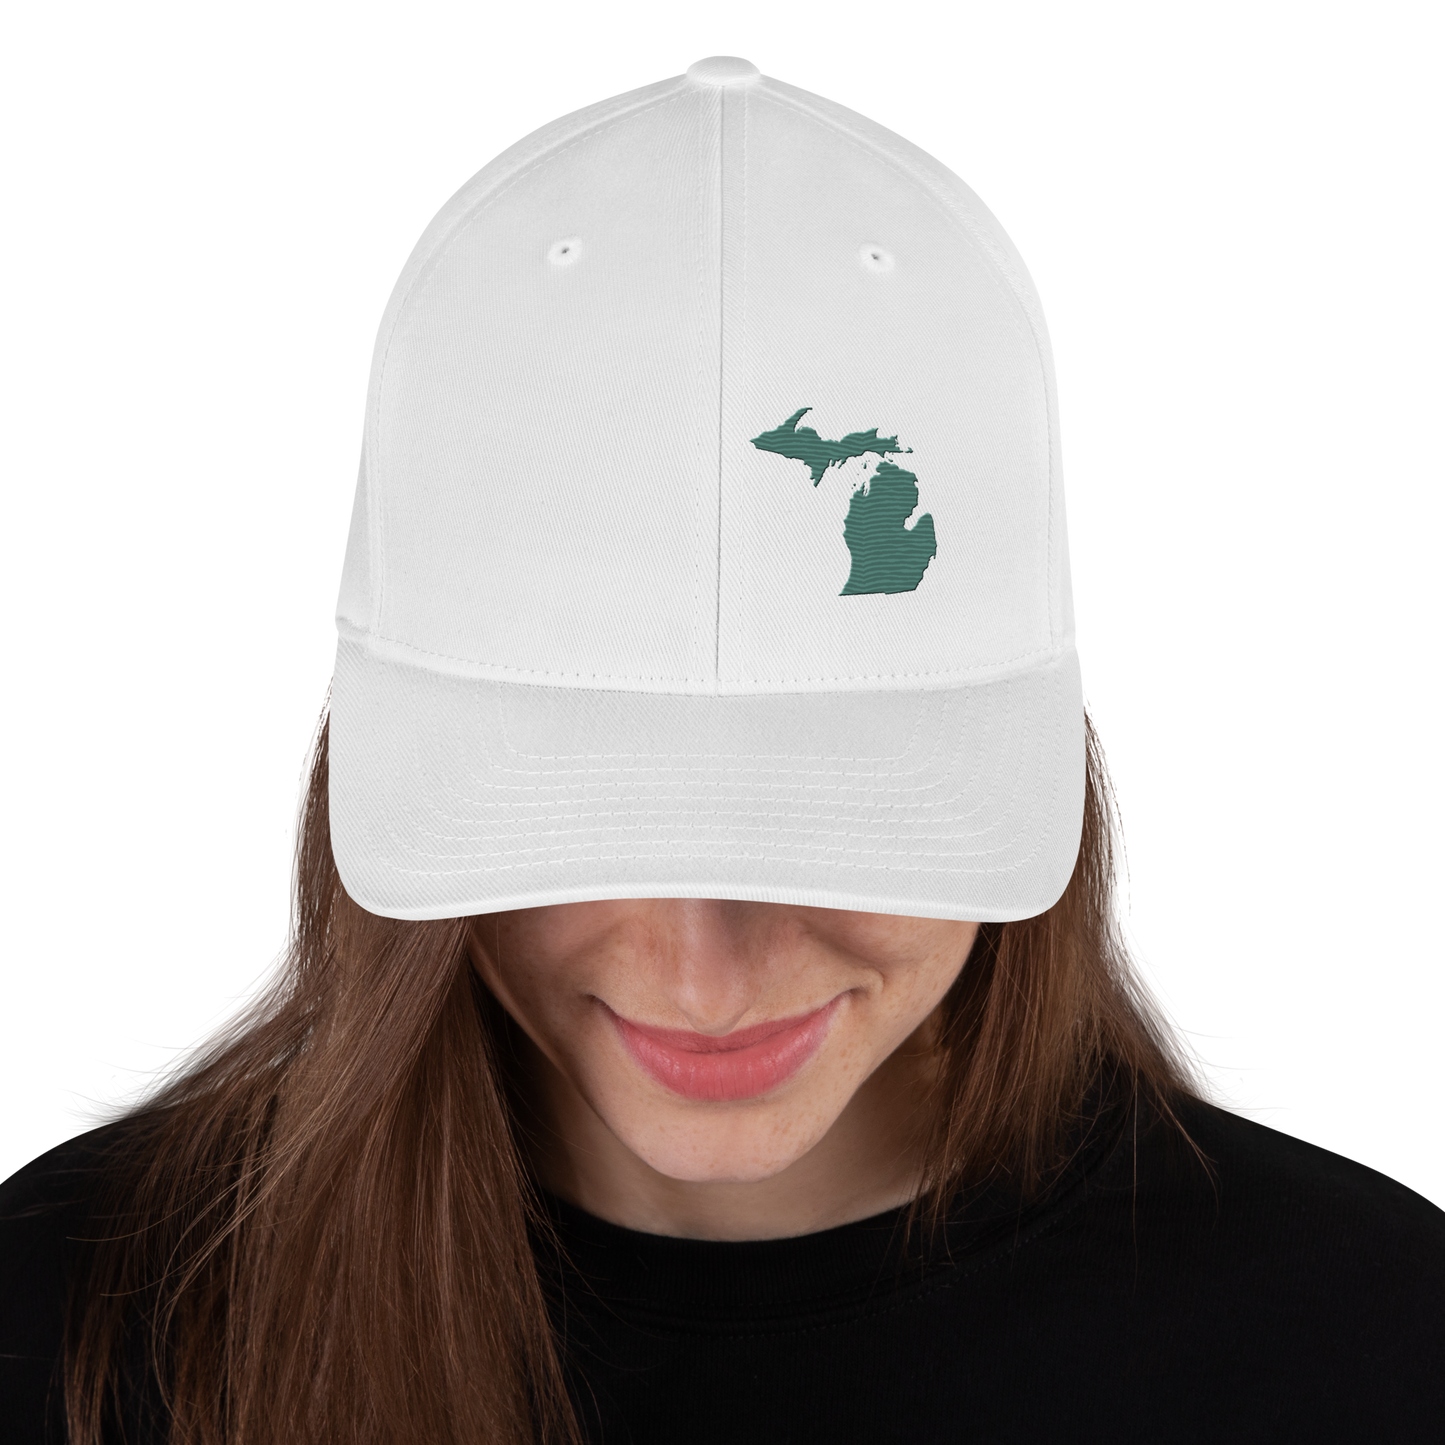 Michigan Fitted Baseball Cap | Copper Green Outline